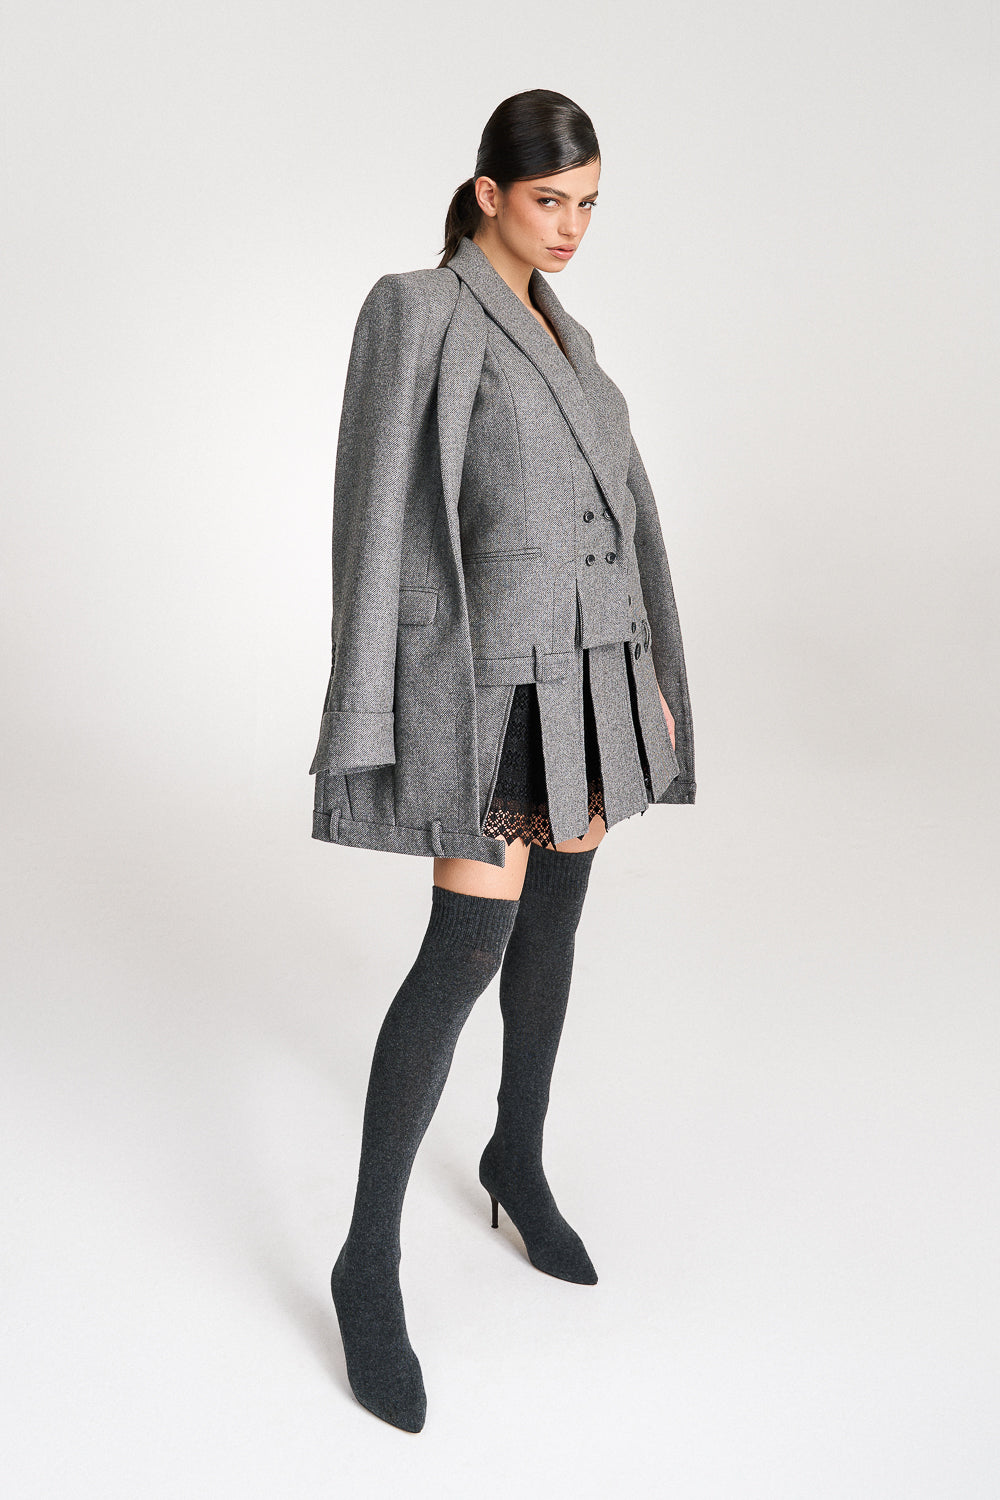 'Lima' Grey Wool Layer Suit Blazer with Vest